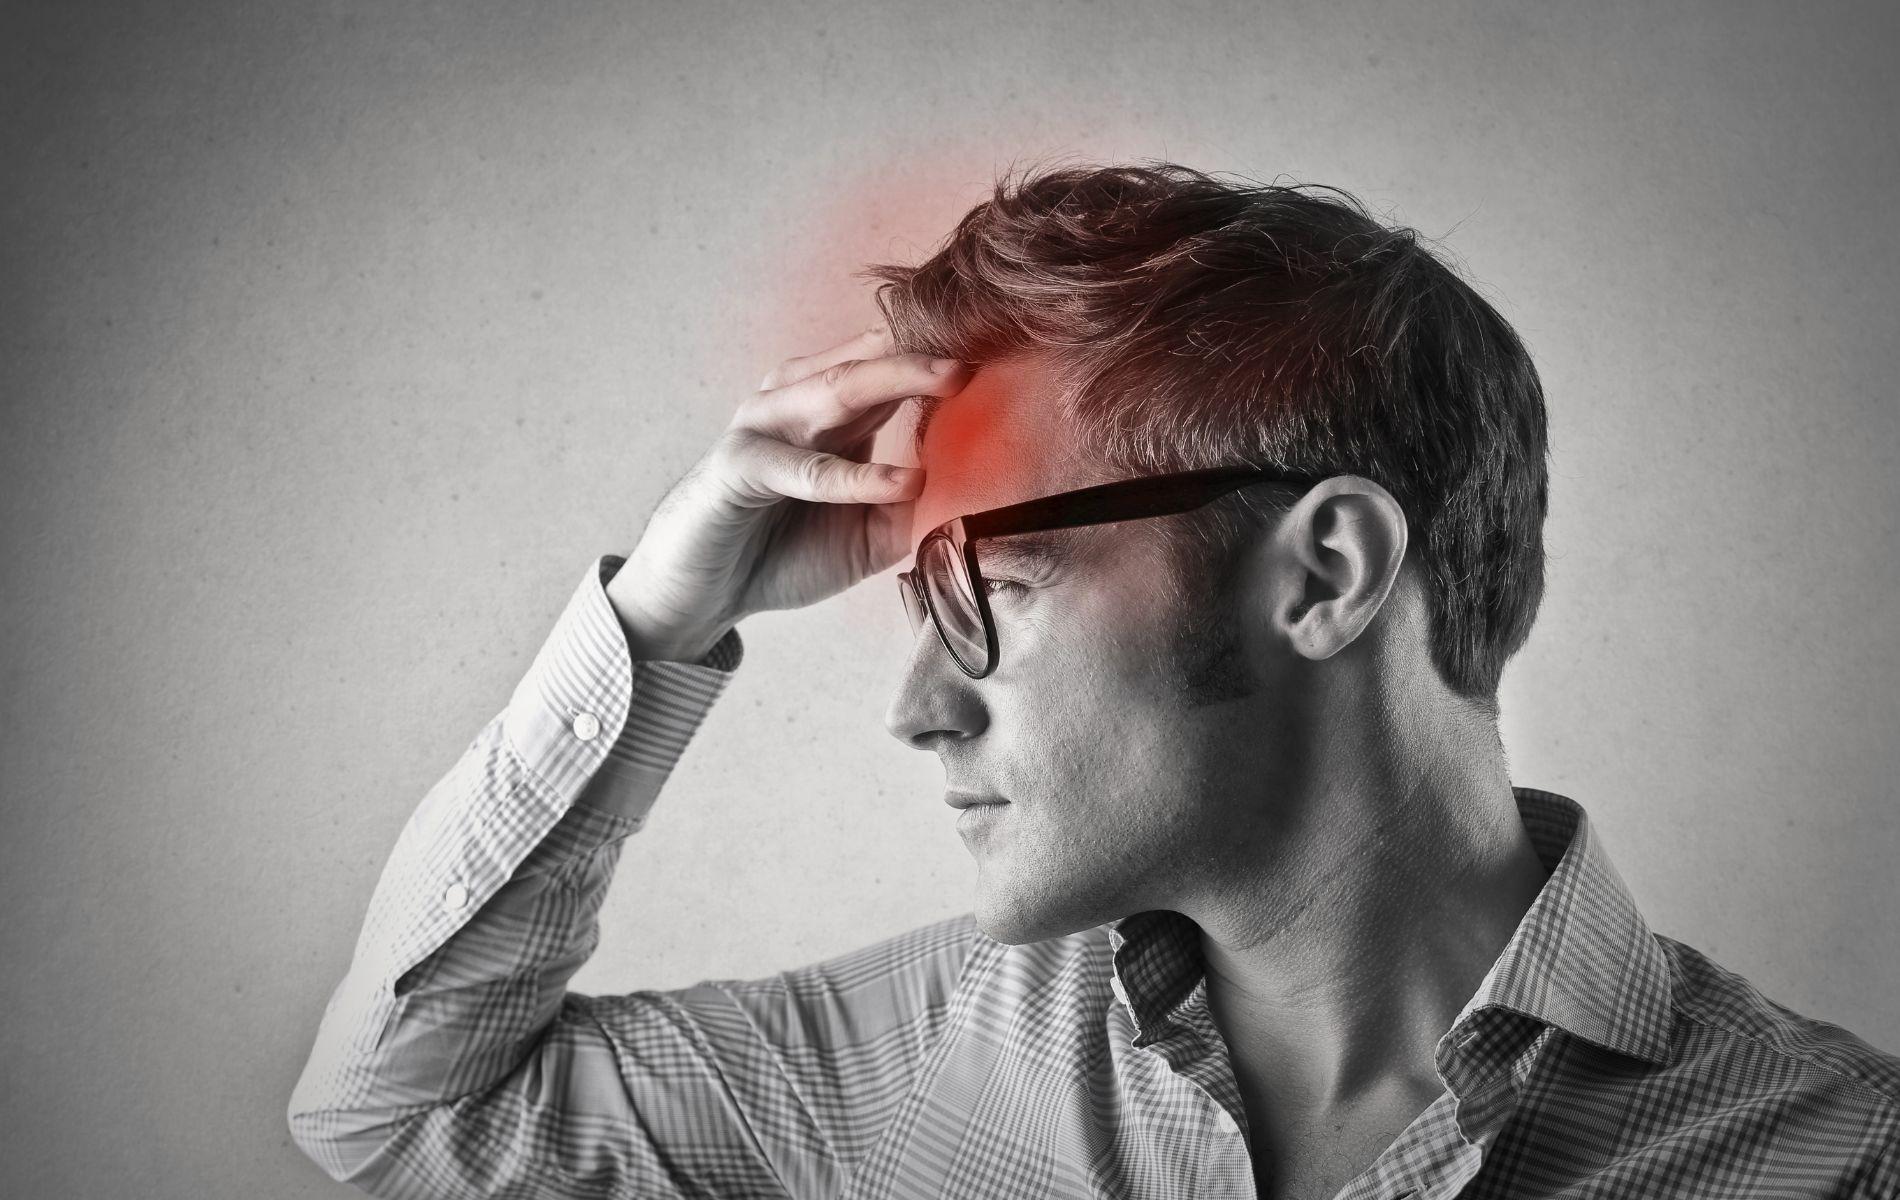 What are the types of headaches associated with TBI?